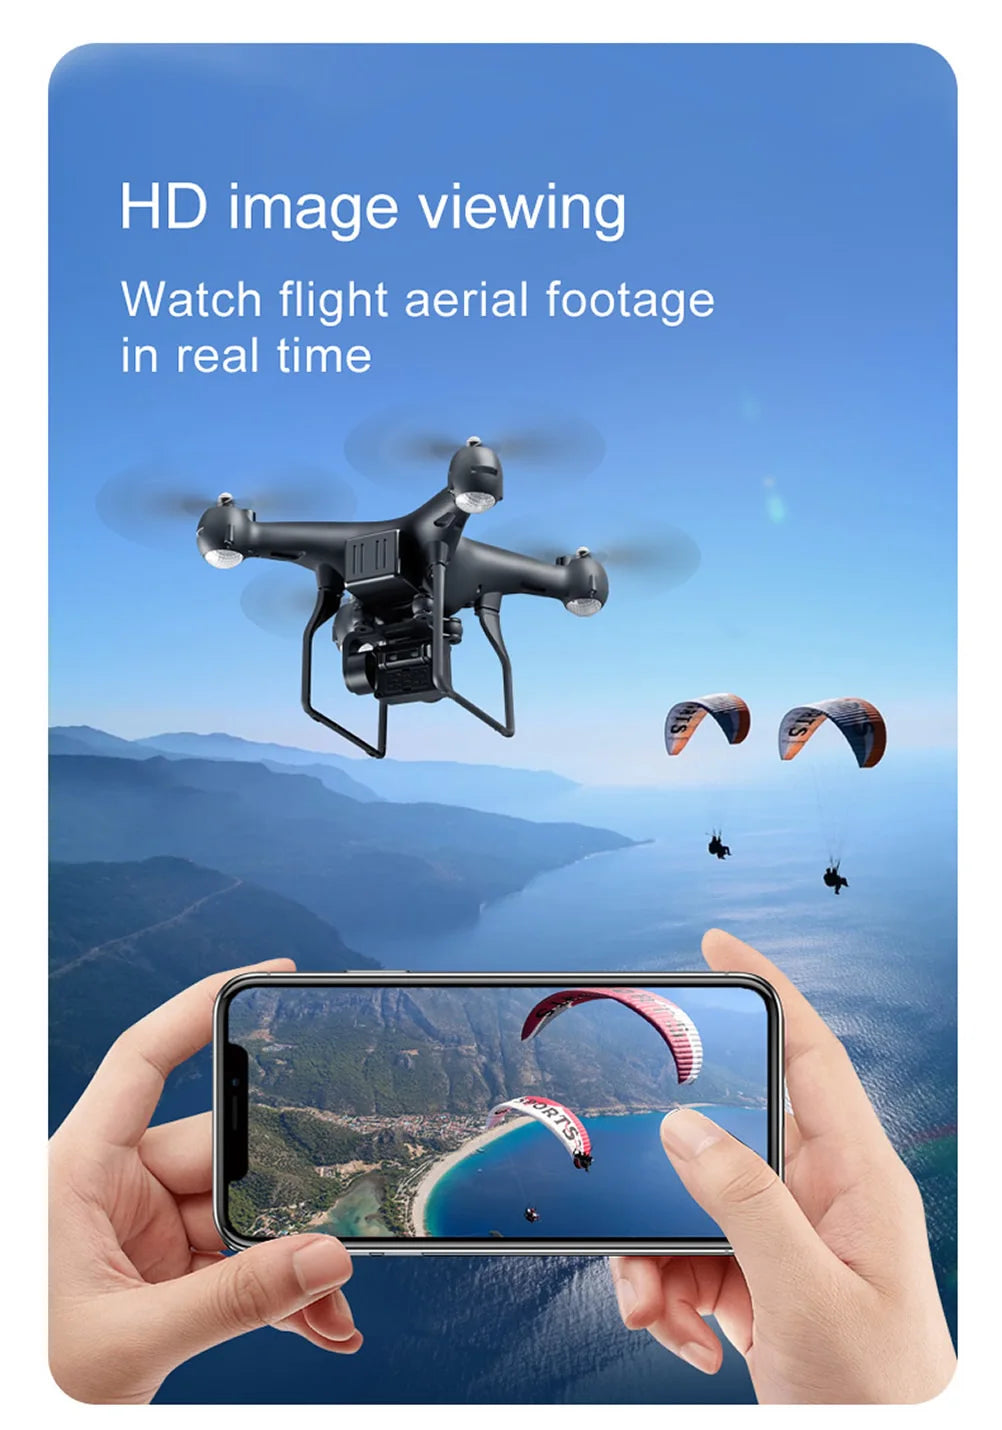 New Remote Control Drone, hd image viewing watch flight aerial footage in real